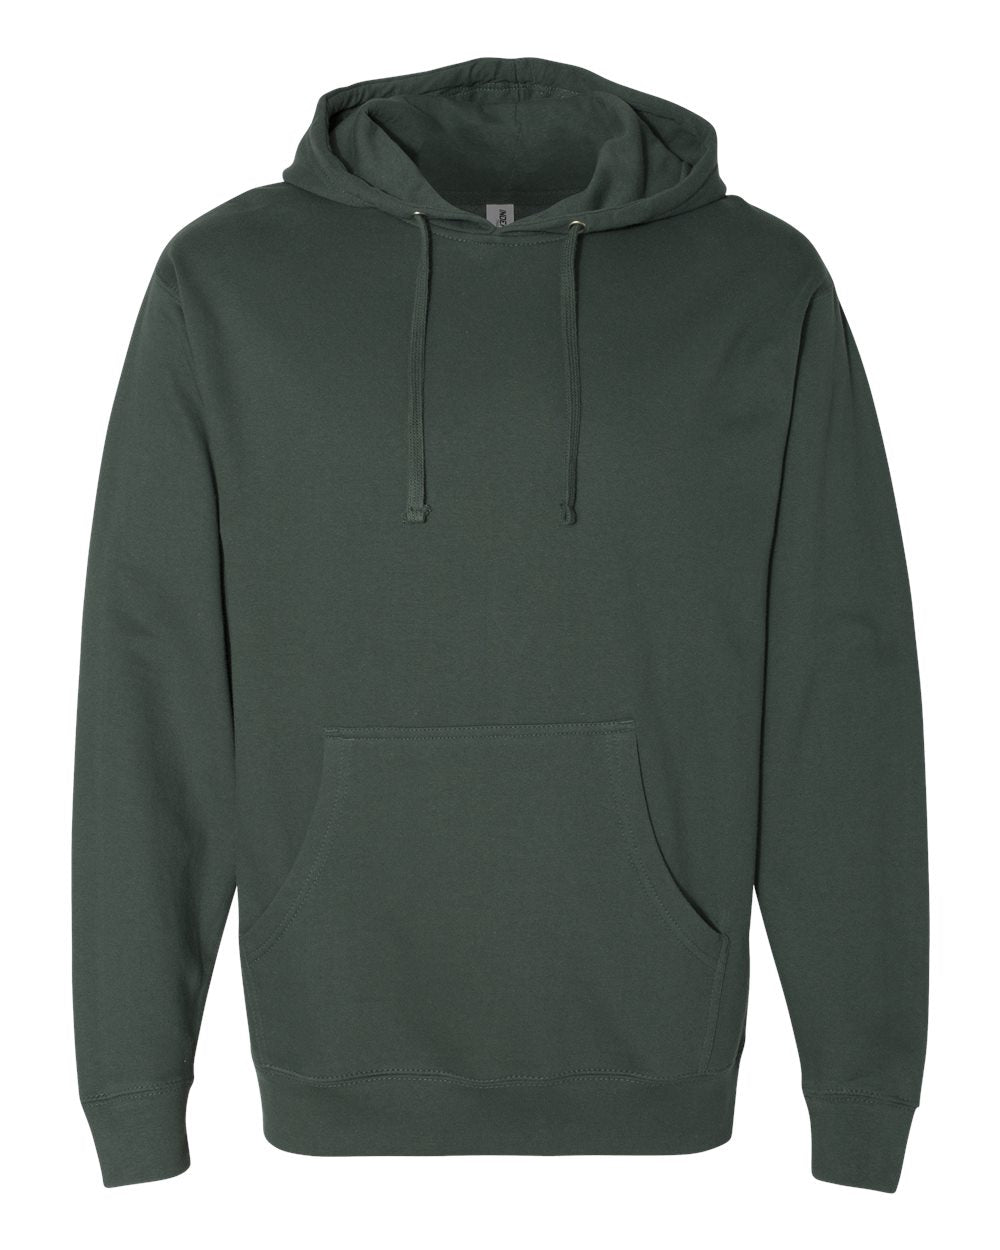 Download Independent - Midweight Hooded Pullover Sweatshirt - Full ...